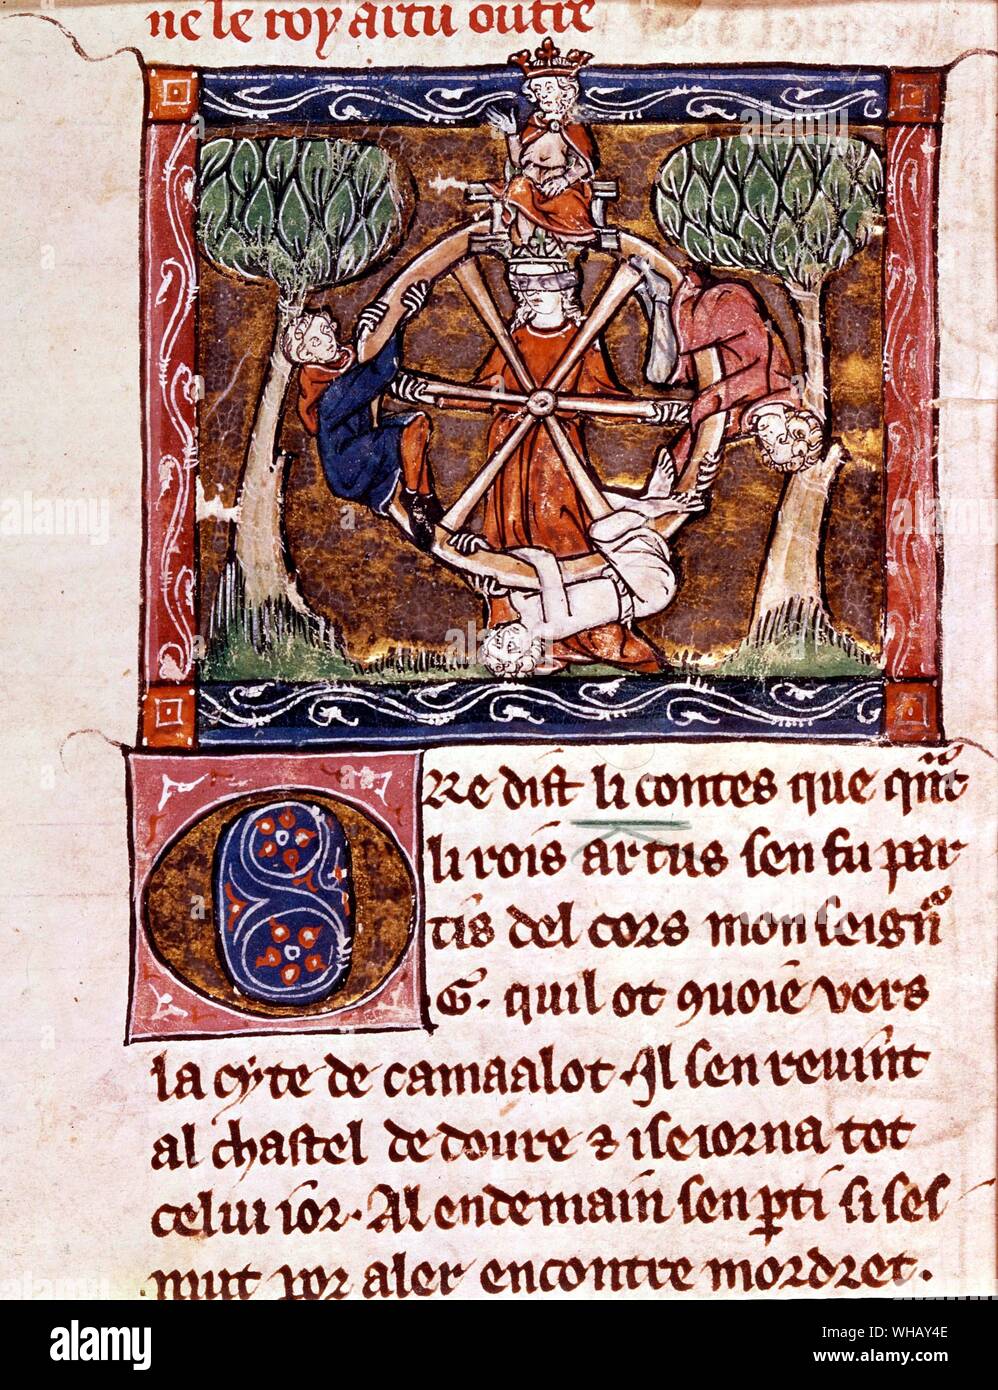 Blind Goddess, fortune of her wheel, with King Arthur enthroned 1316. Stock Photo